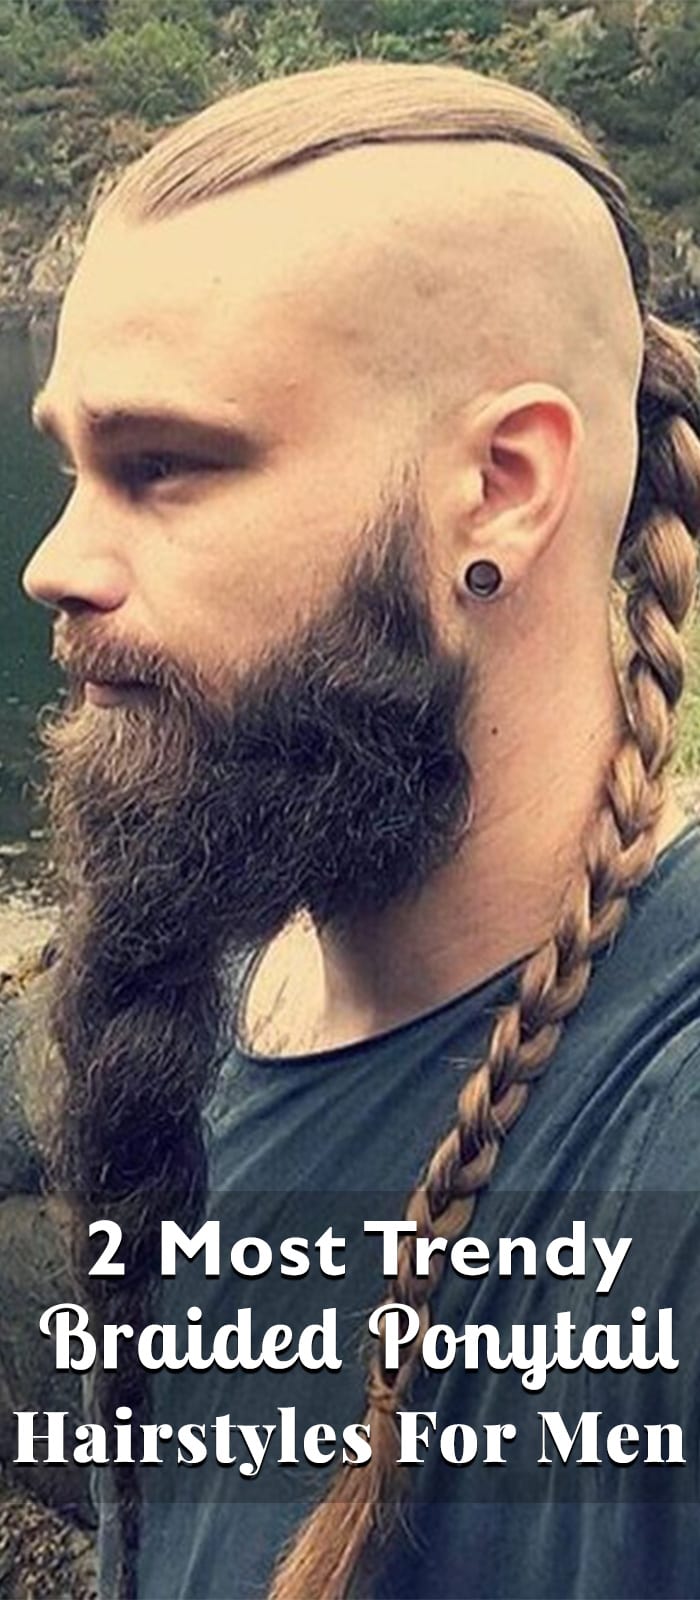 2 Most Trendy Braided Ponytail Hairstyles For Men in 2018